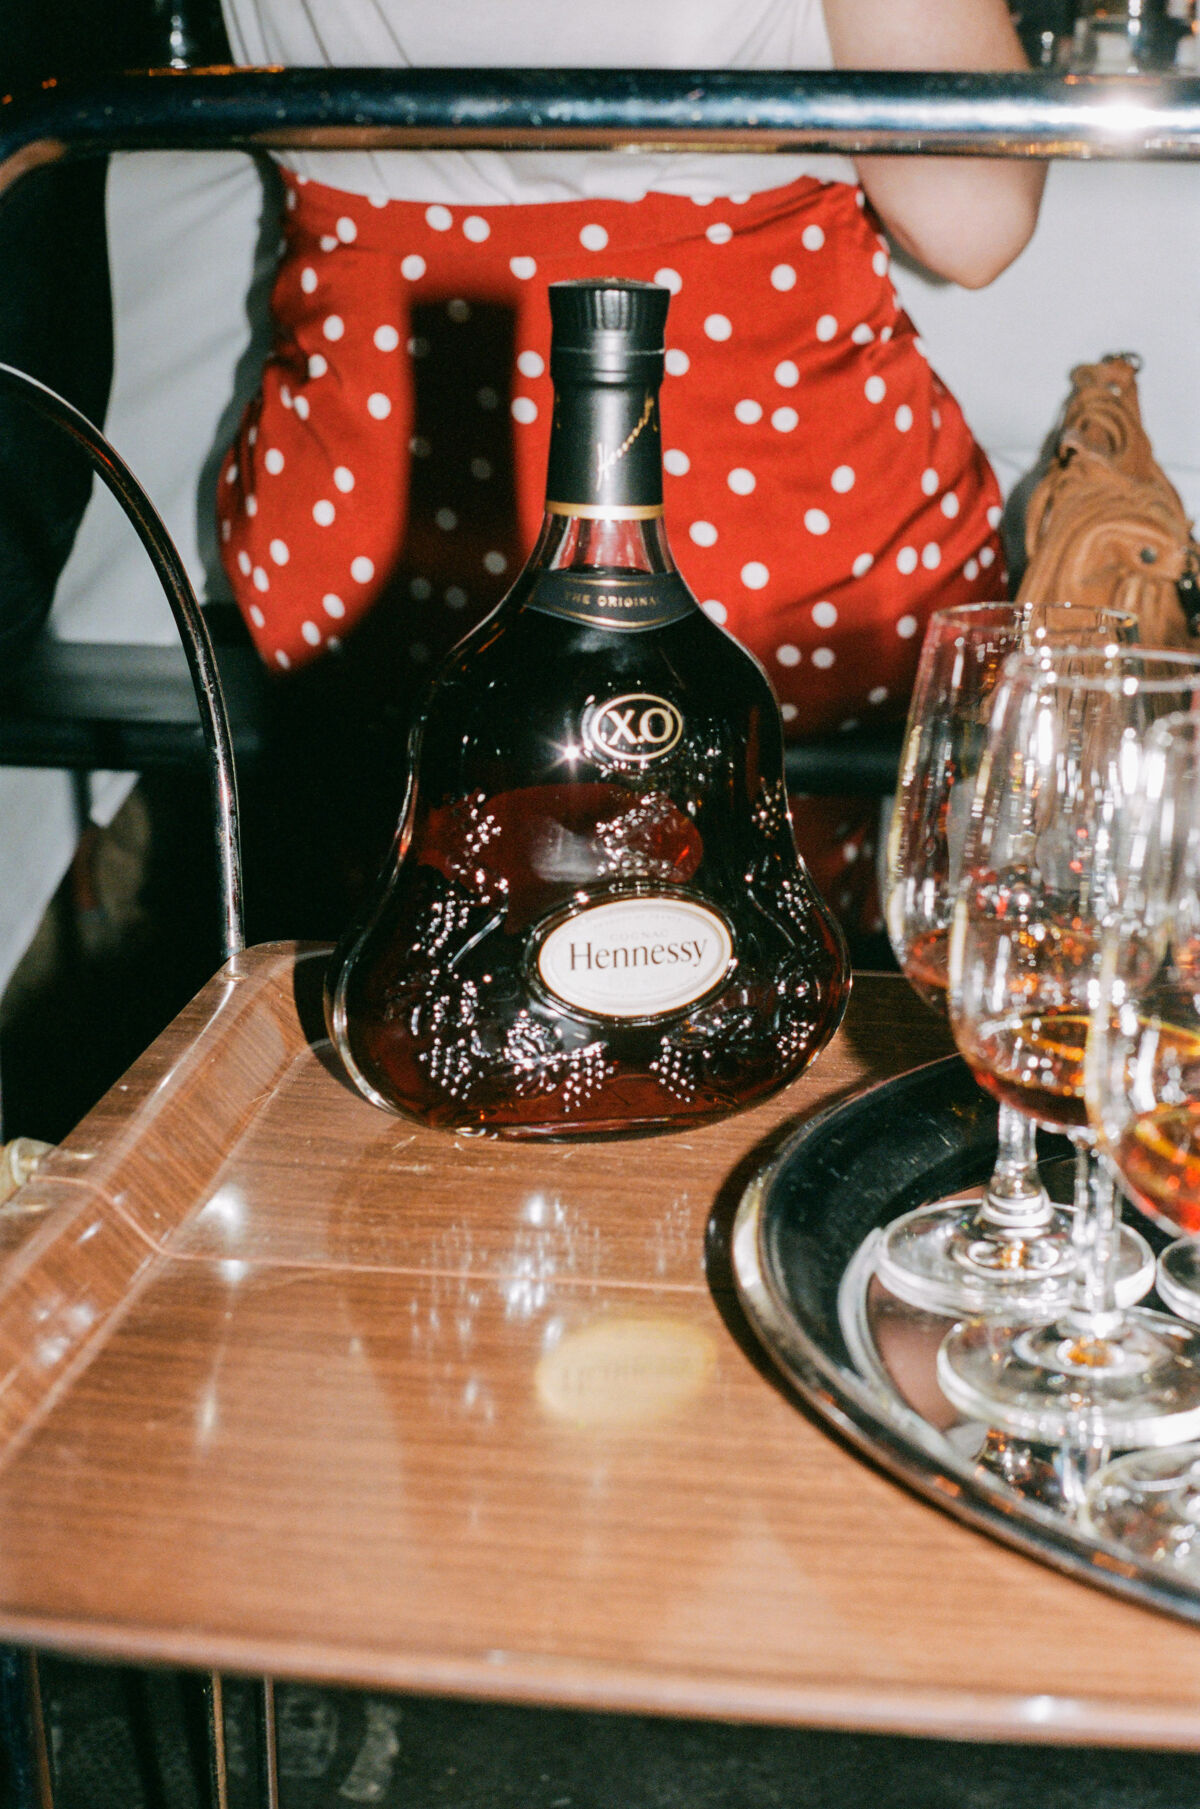 Le cognac Hennessy tombe pile-pois.